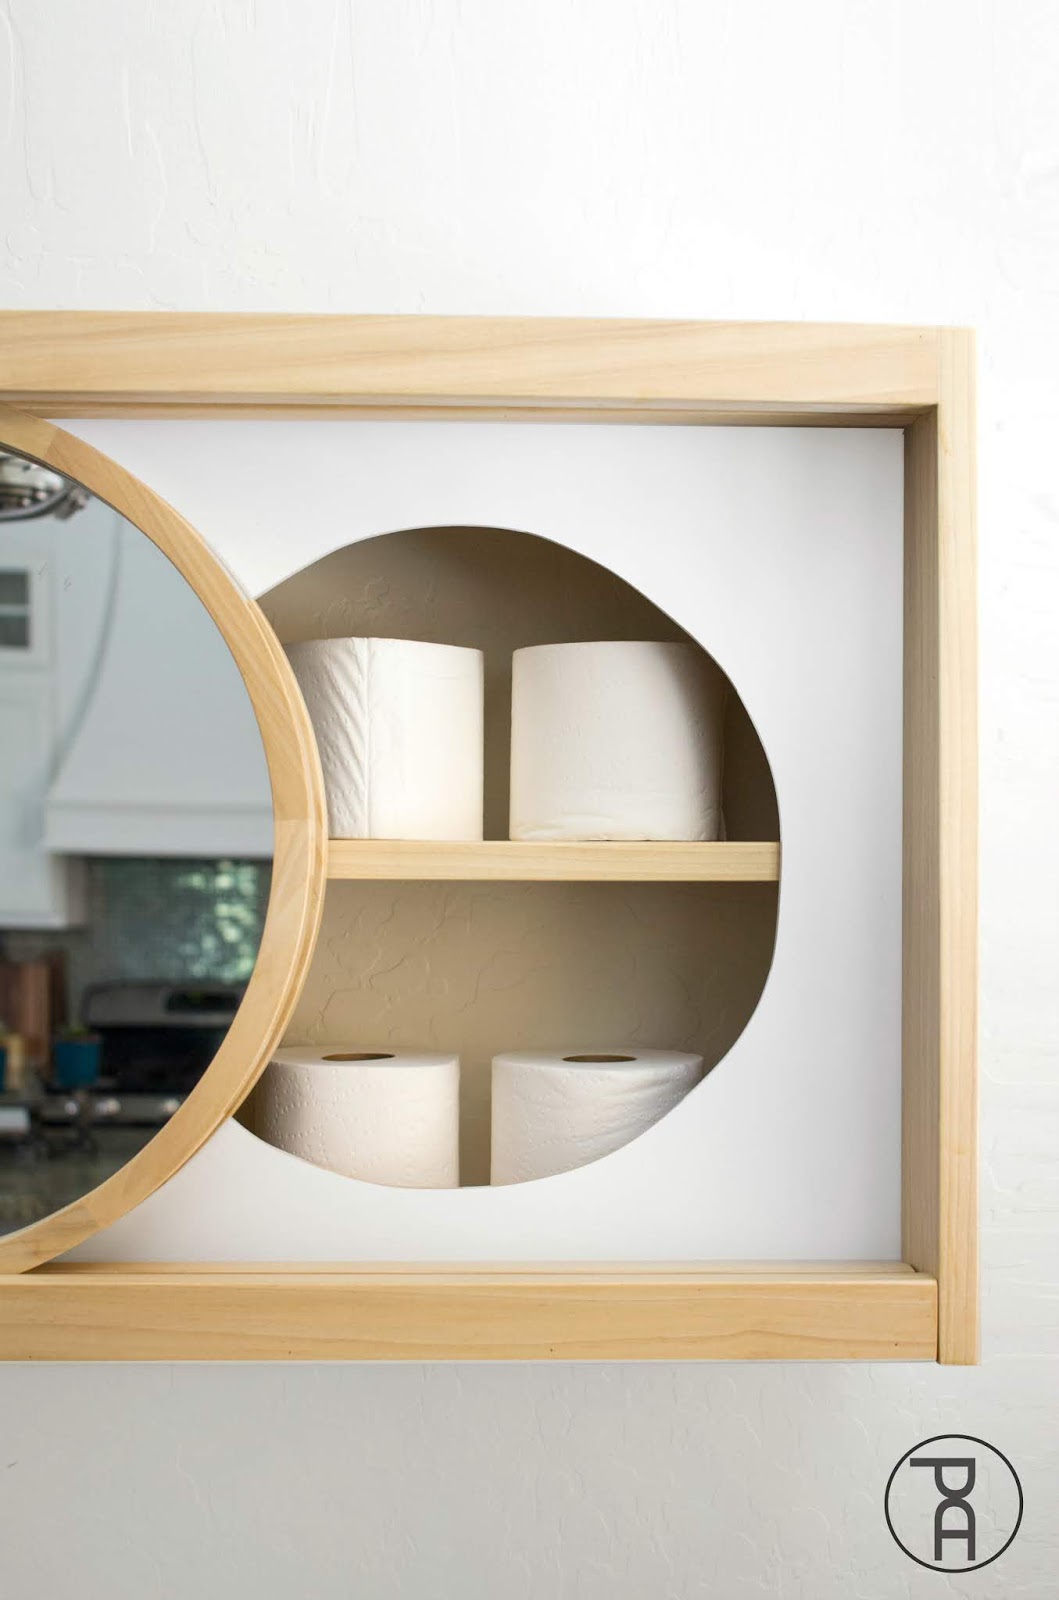 How To Build A Round Mirror Wall Cabinet Pneumatic Addict